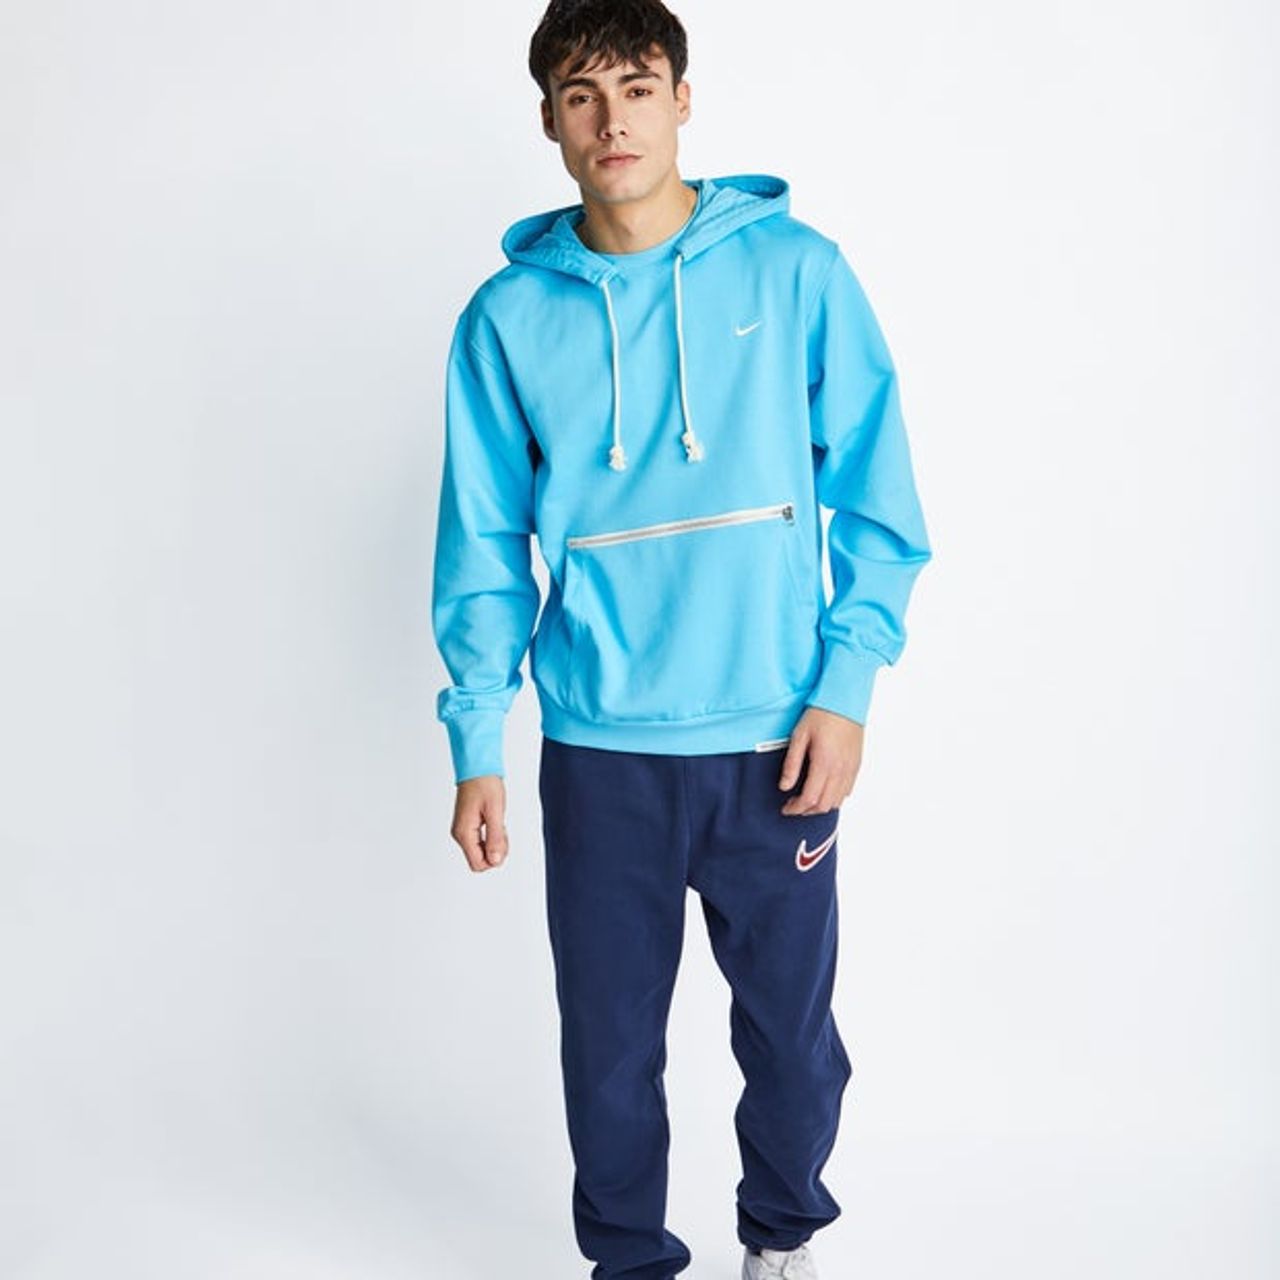 Nike Over The Head - Men Hoodies CV0864-474 - Compare prices